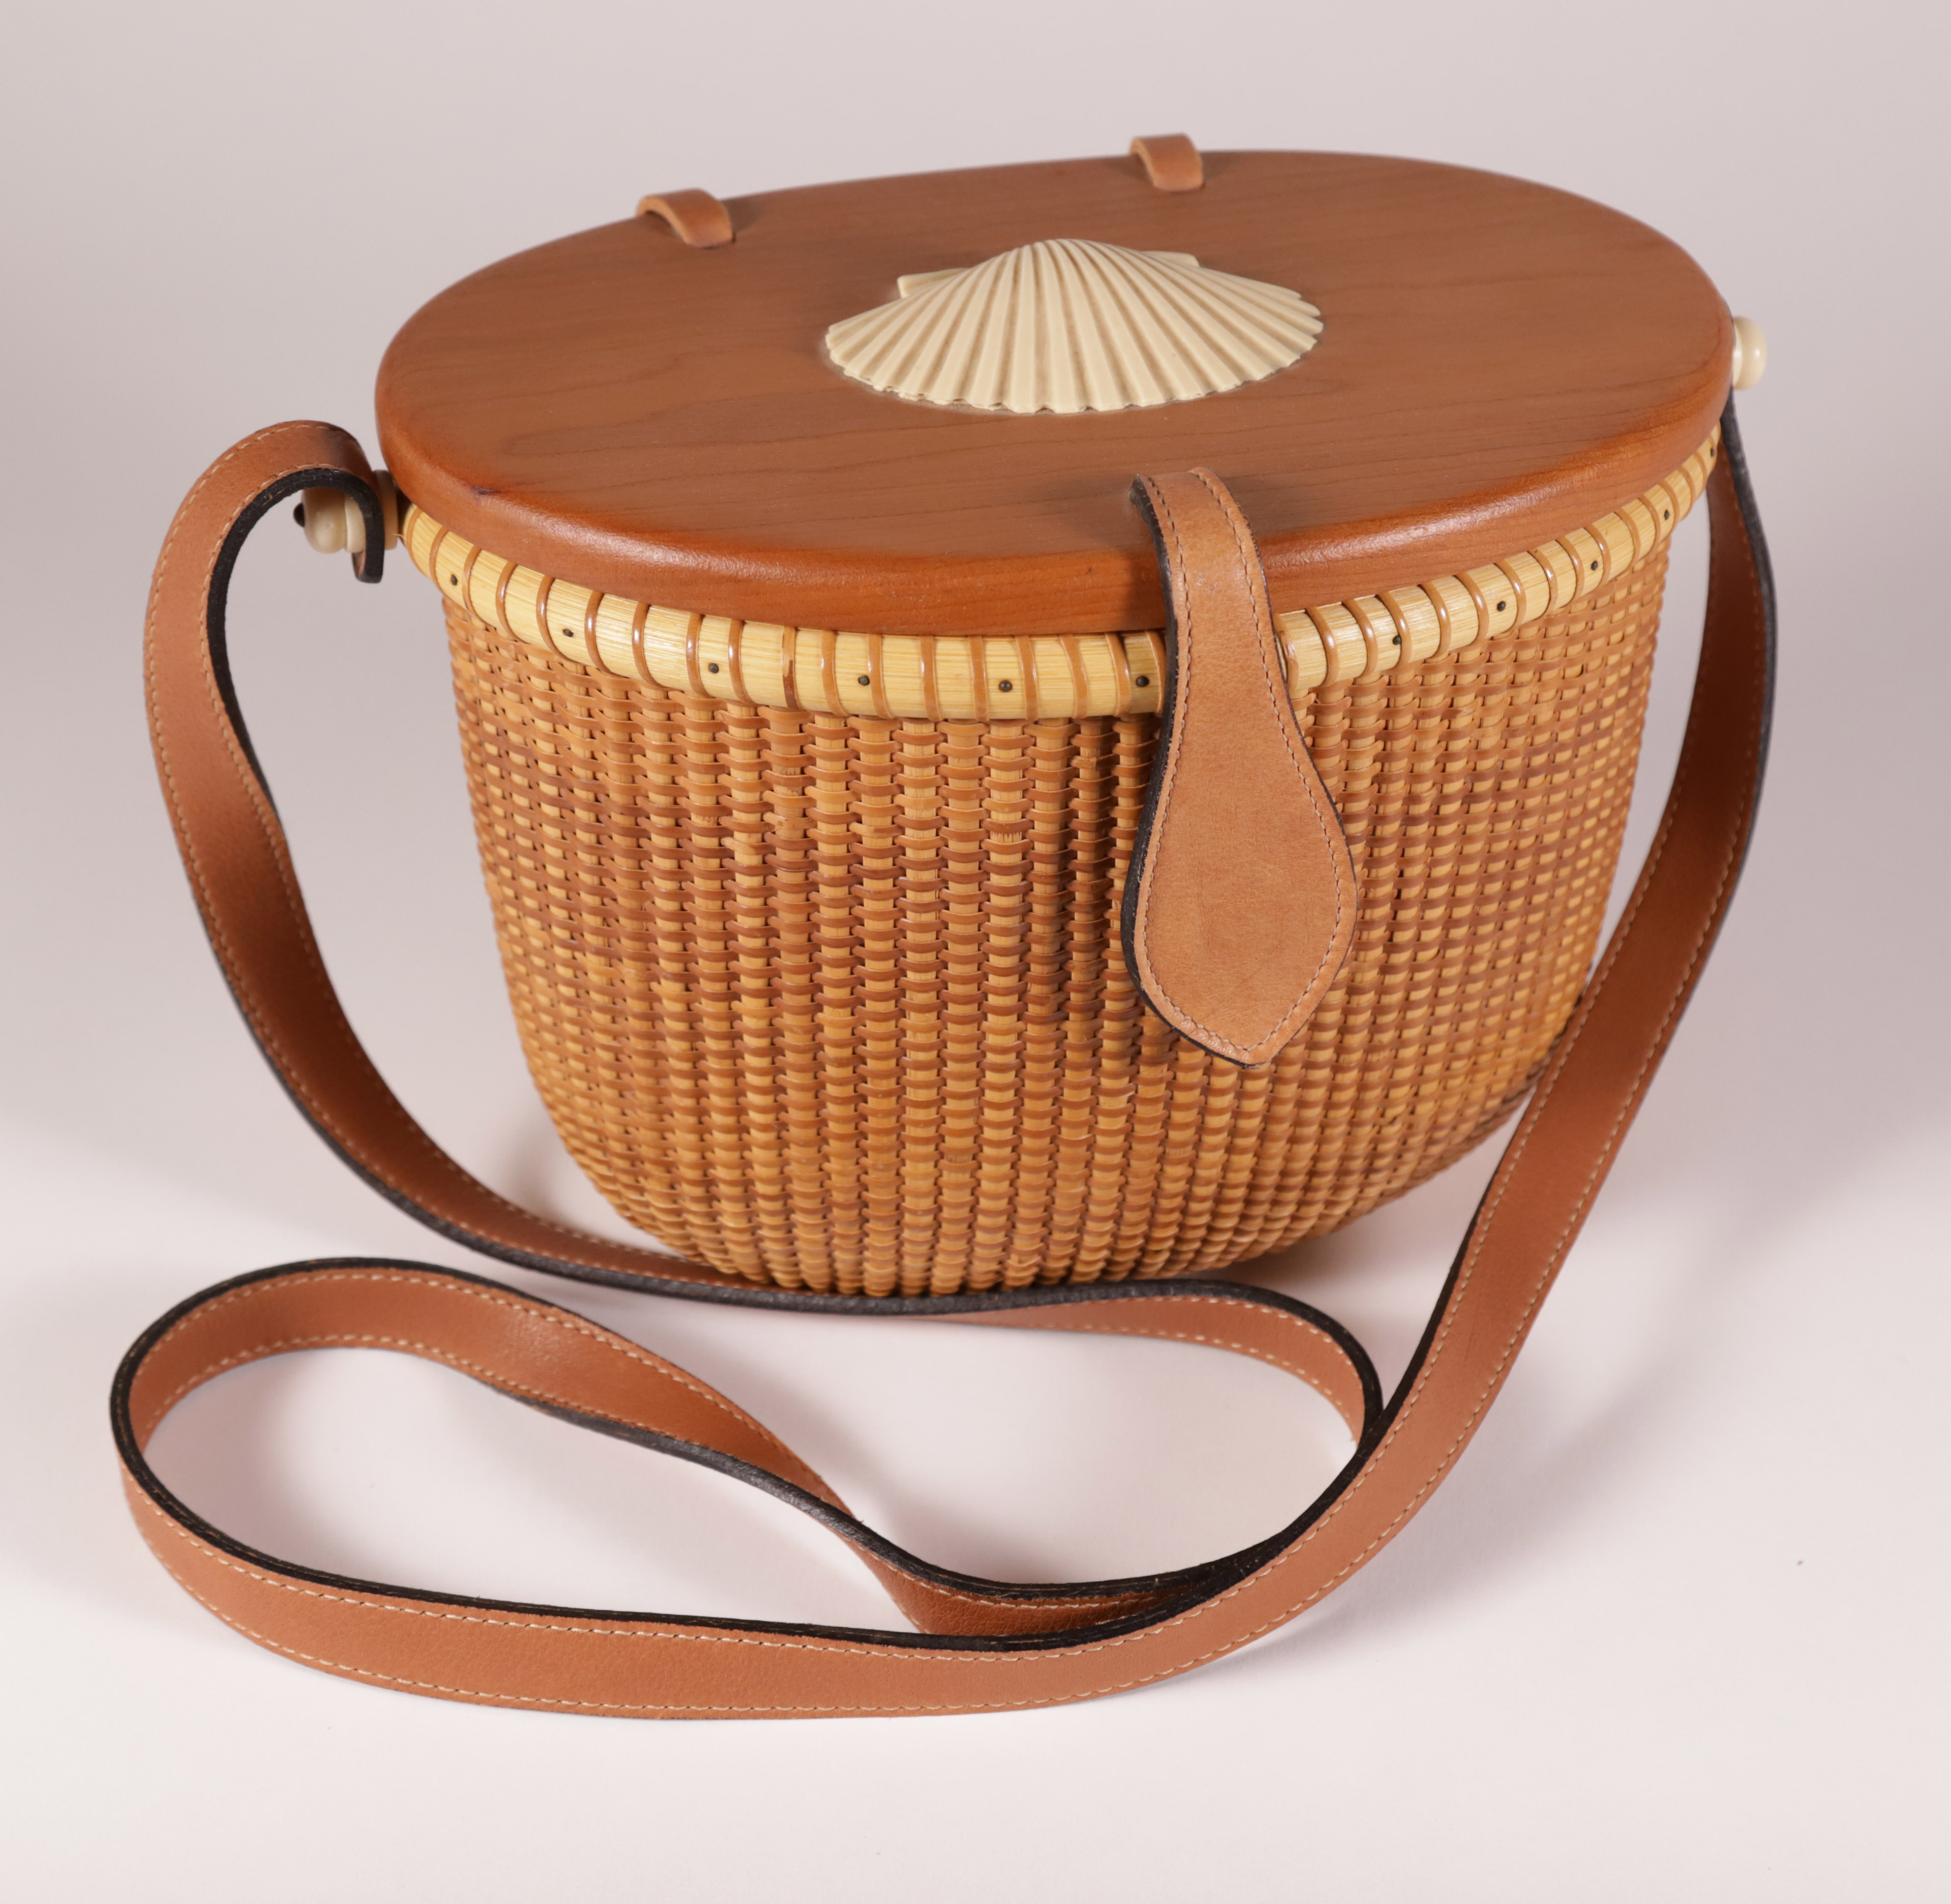 Nantucket Basket Purse by Stephen Gibbs sold at auction on 28th October |  Bidsquare